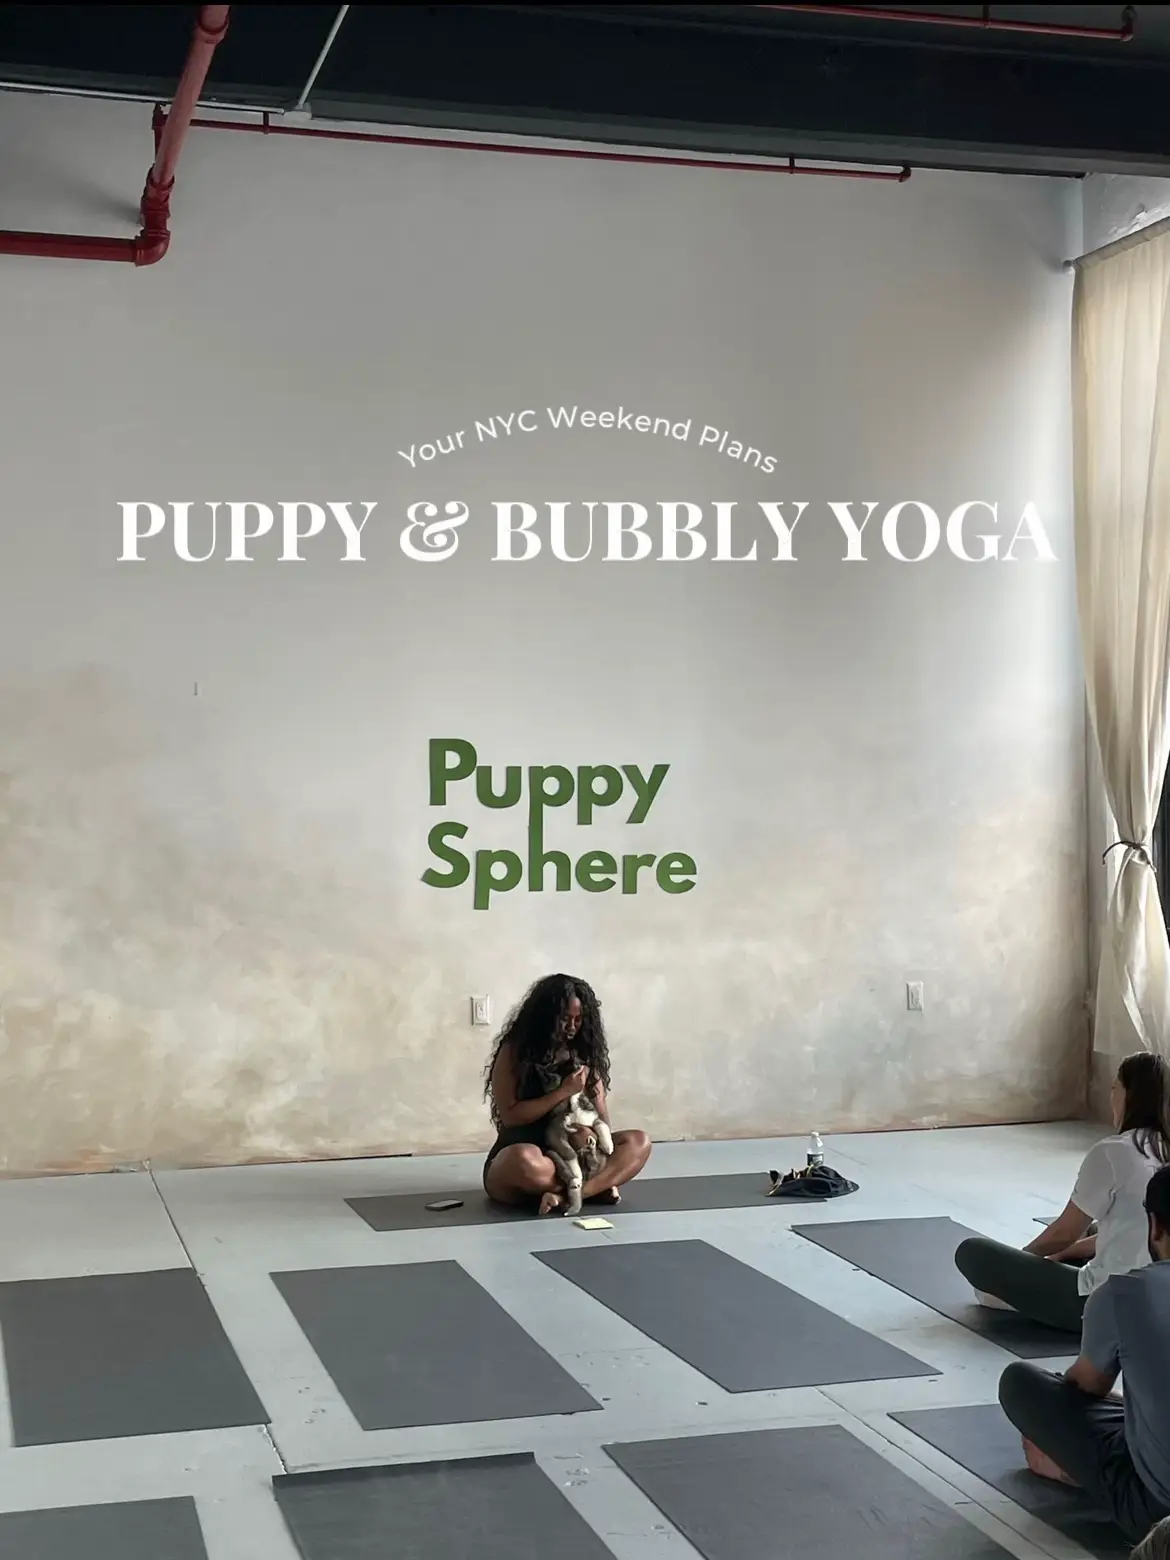 PUPPY & BUBBLY YOGA's images